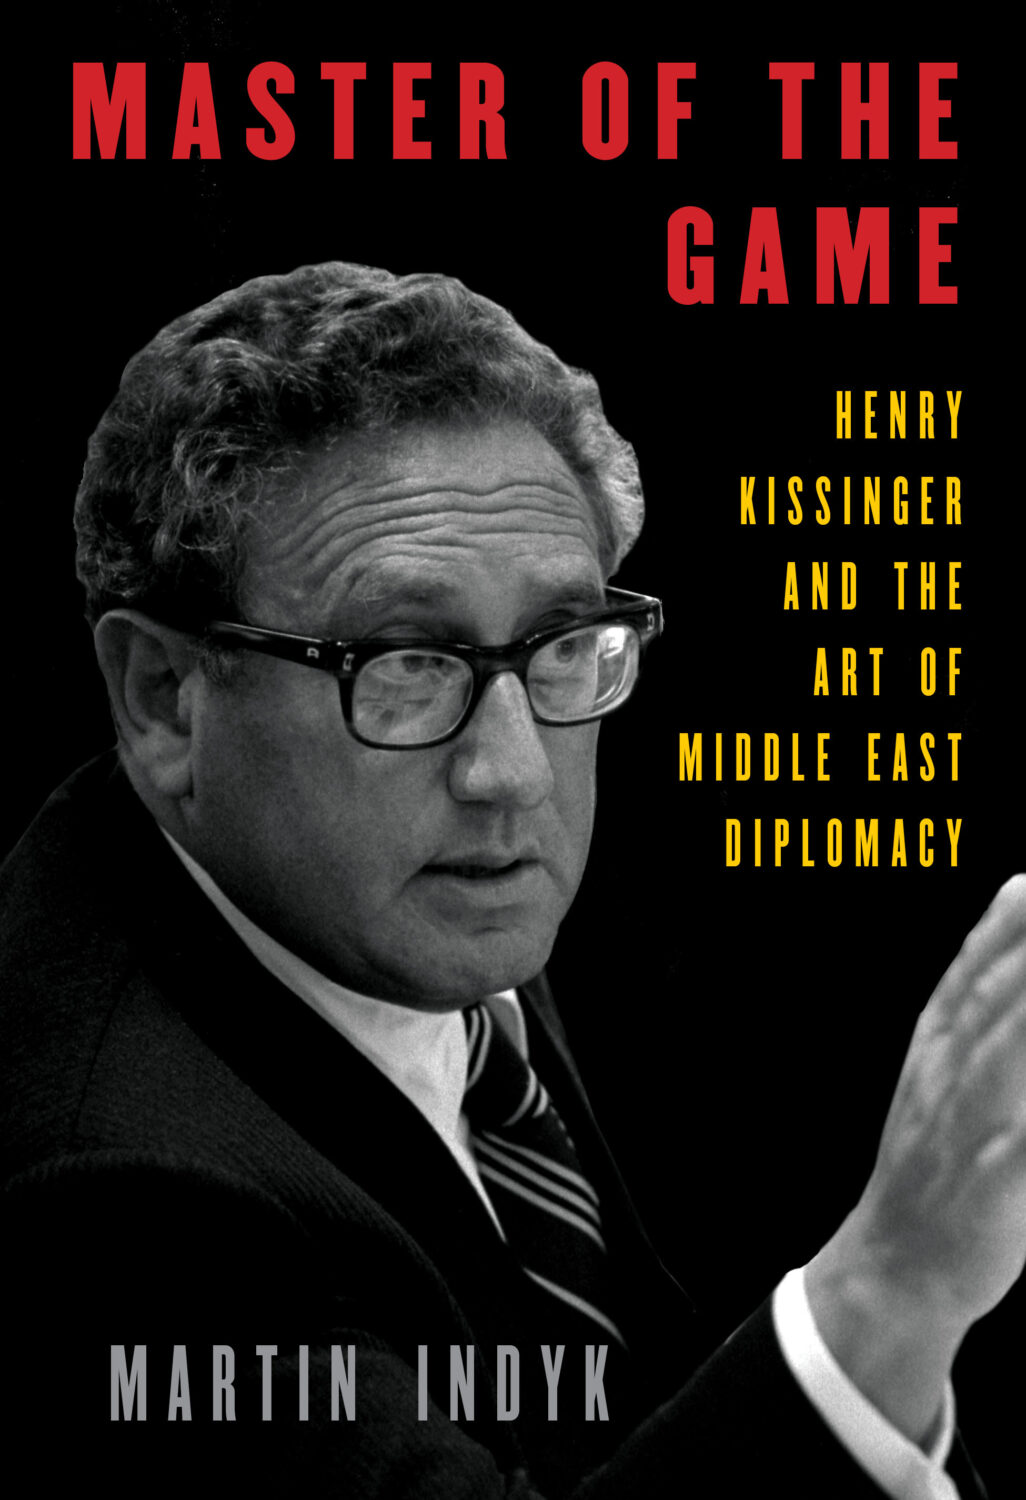 Book jacket of Master of the Game by Martin Indyk